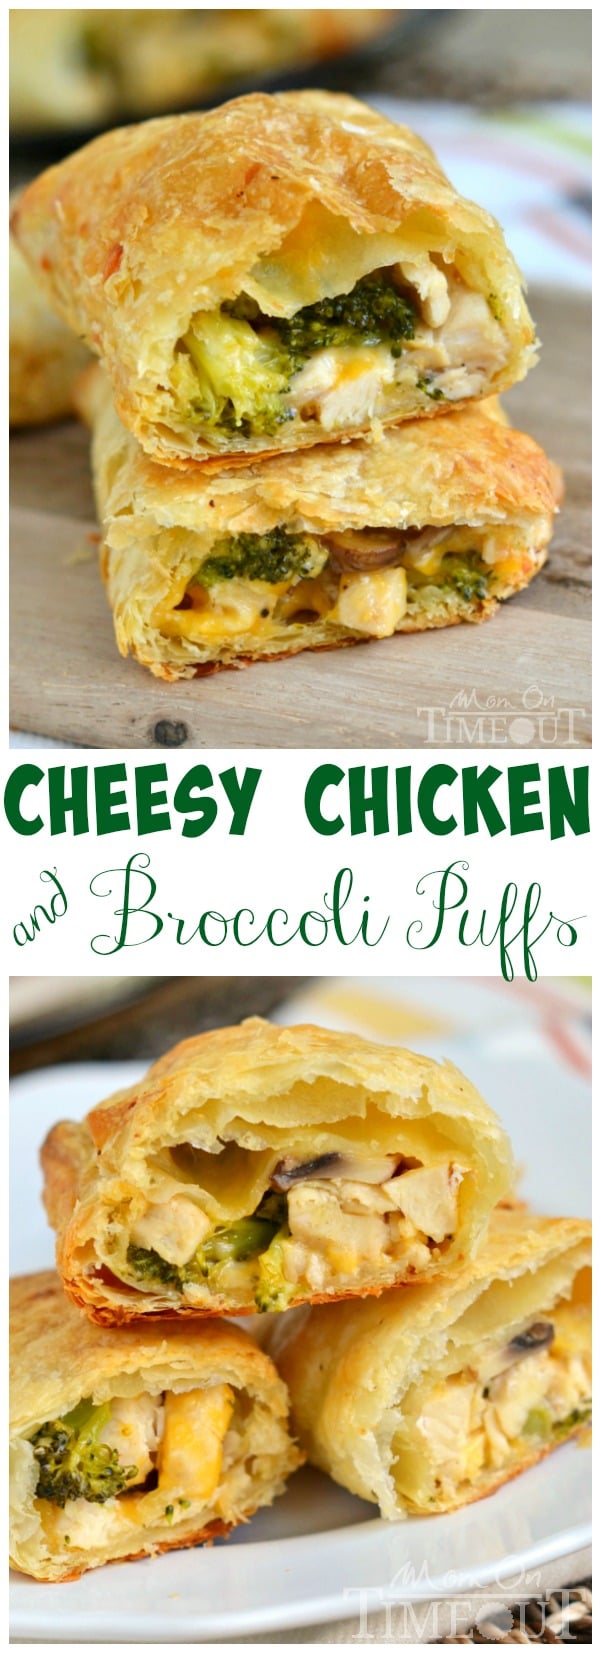 Cheesy Chicken and Broccoli Puffs for the dinner win! Made with rotisserie chicken and puff pastry, these puffs are delightfully easy to make and are a cheesy favorite with the family! | MomOnTimeout.com | #dinner #recipe #chicken